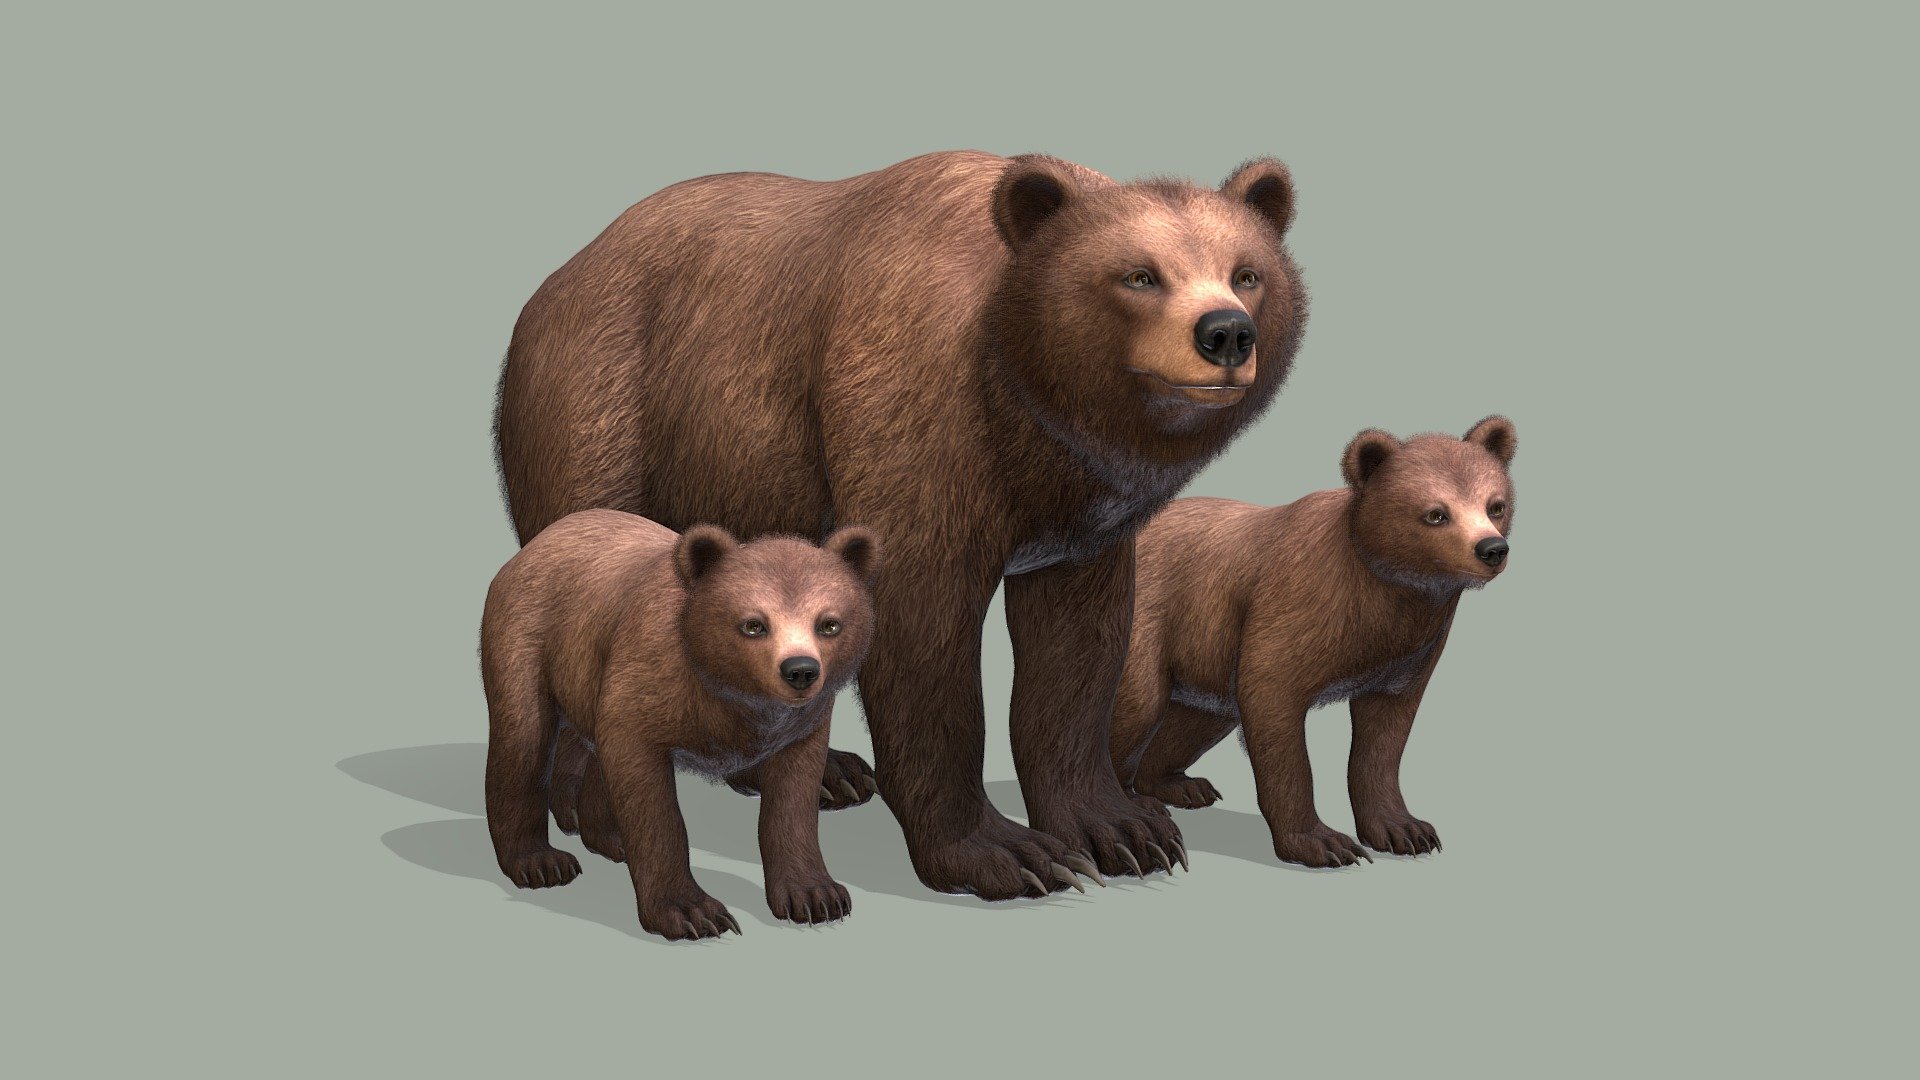 All files with animations are in the attached archive.

The attached archive contains:

Bear Male

Bear Female

Bear Cub

If you have any questions, write to me by mail 3d model